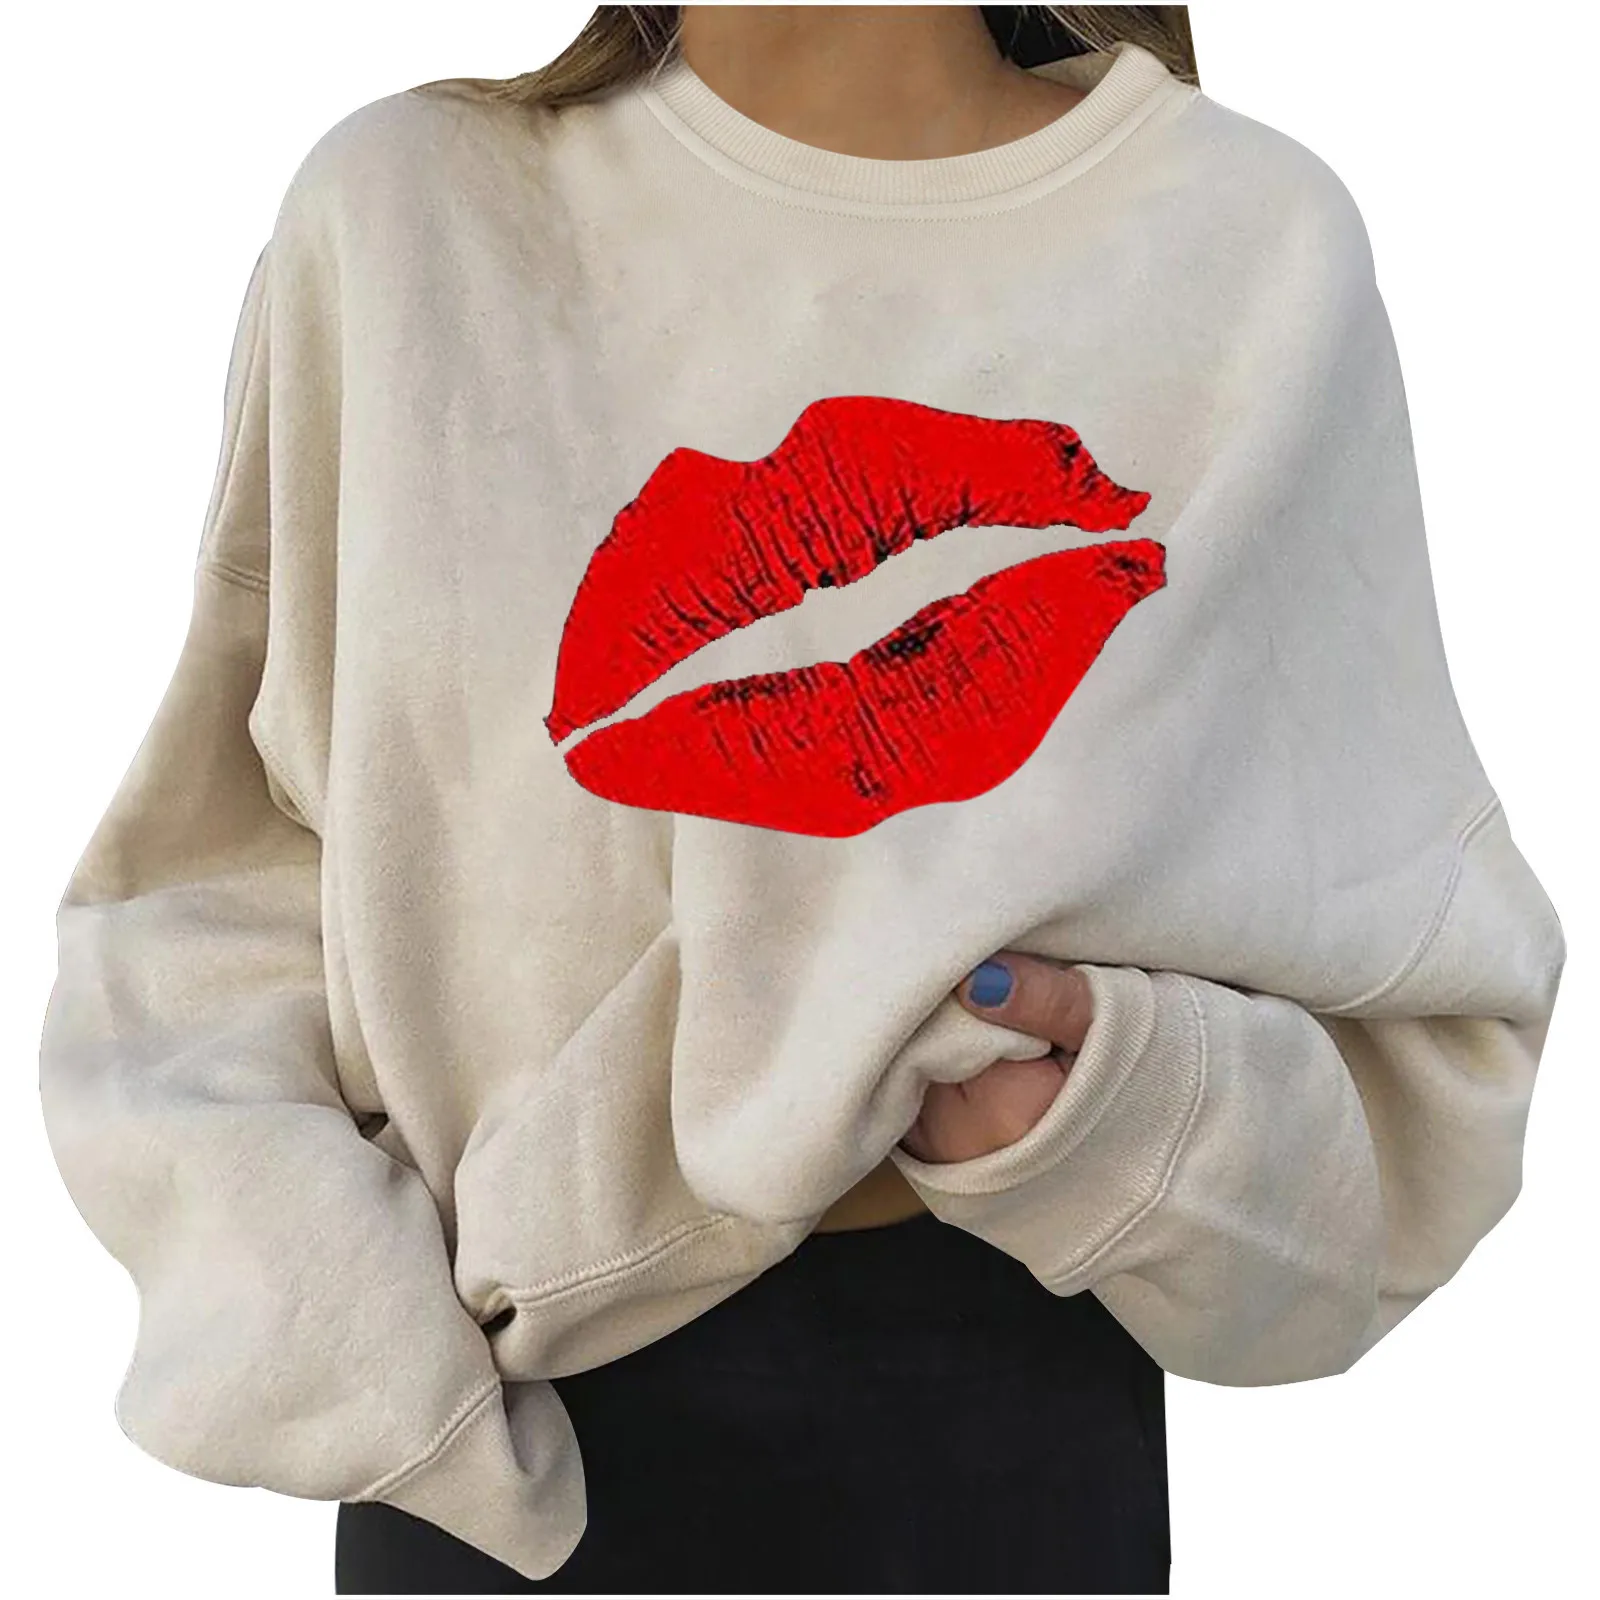 4# Women Plus Size Sweaters Long Sleeve Color Block Lip Print Straples Collar Sweaters Top Autumn Spring Pullover Свитер Женский